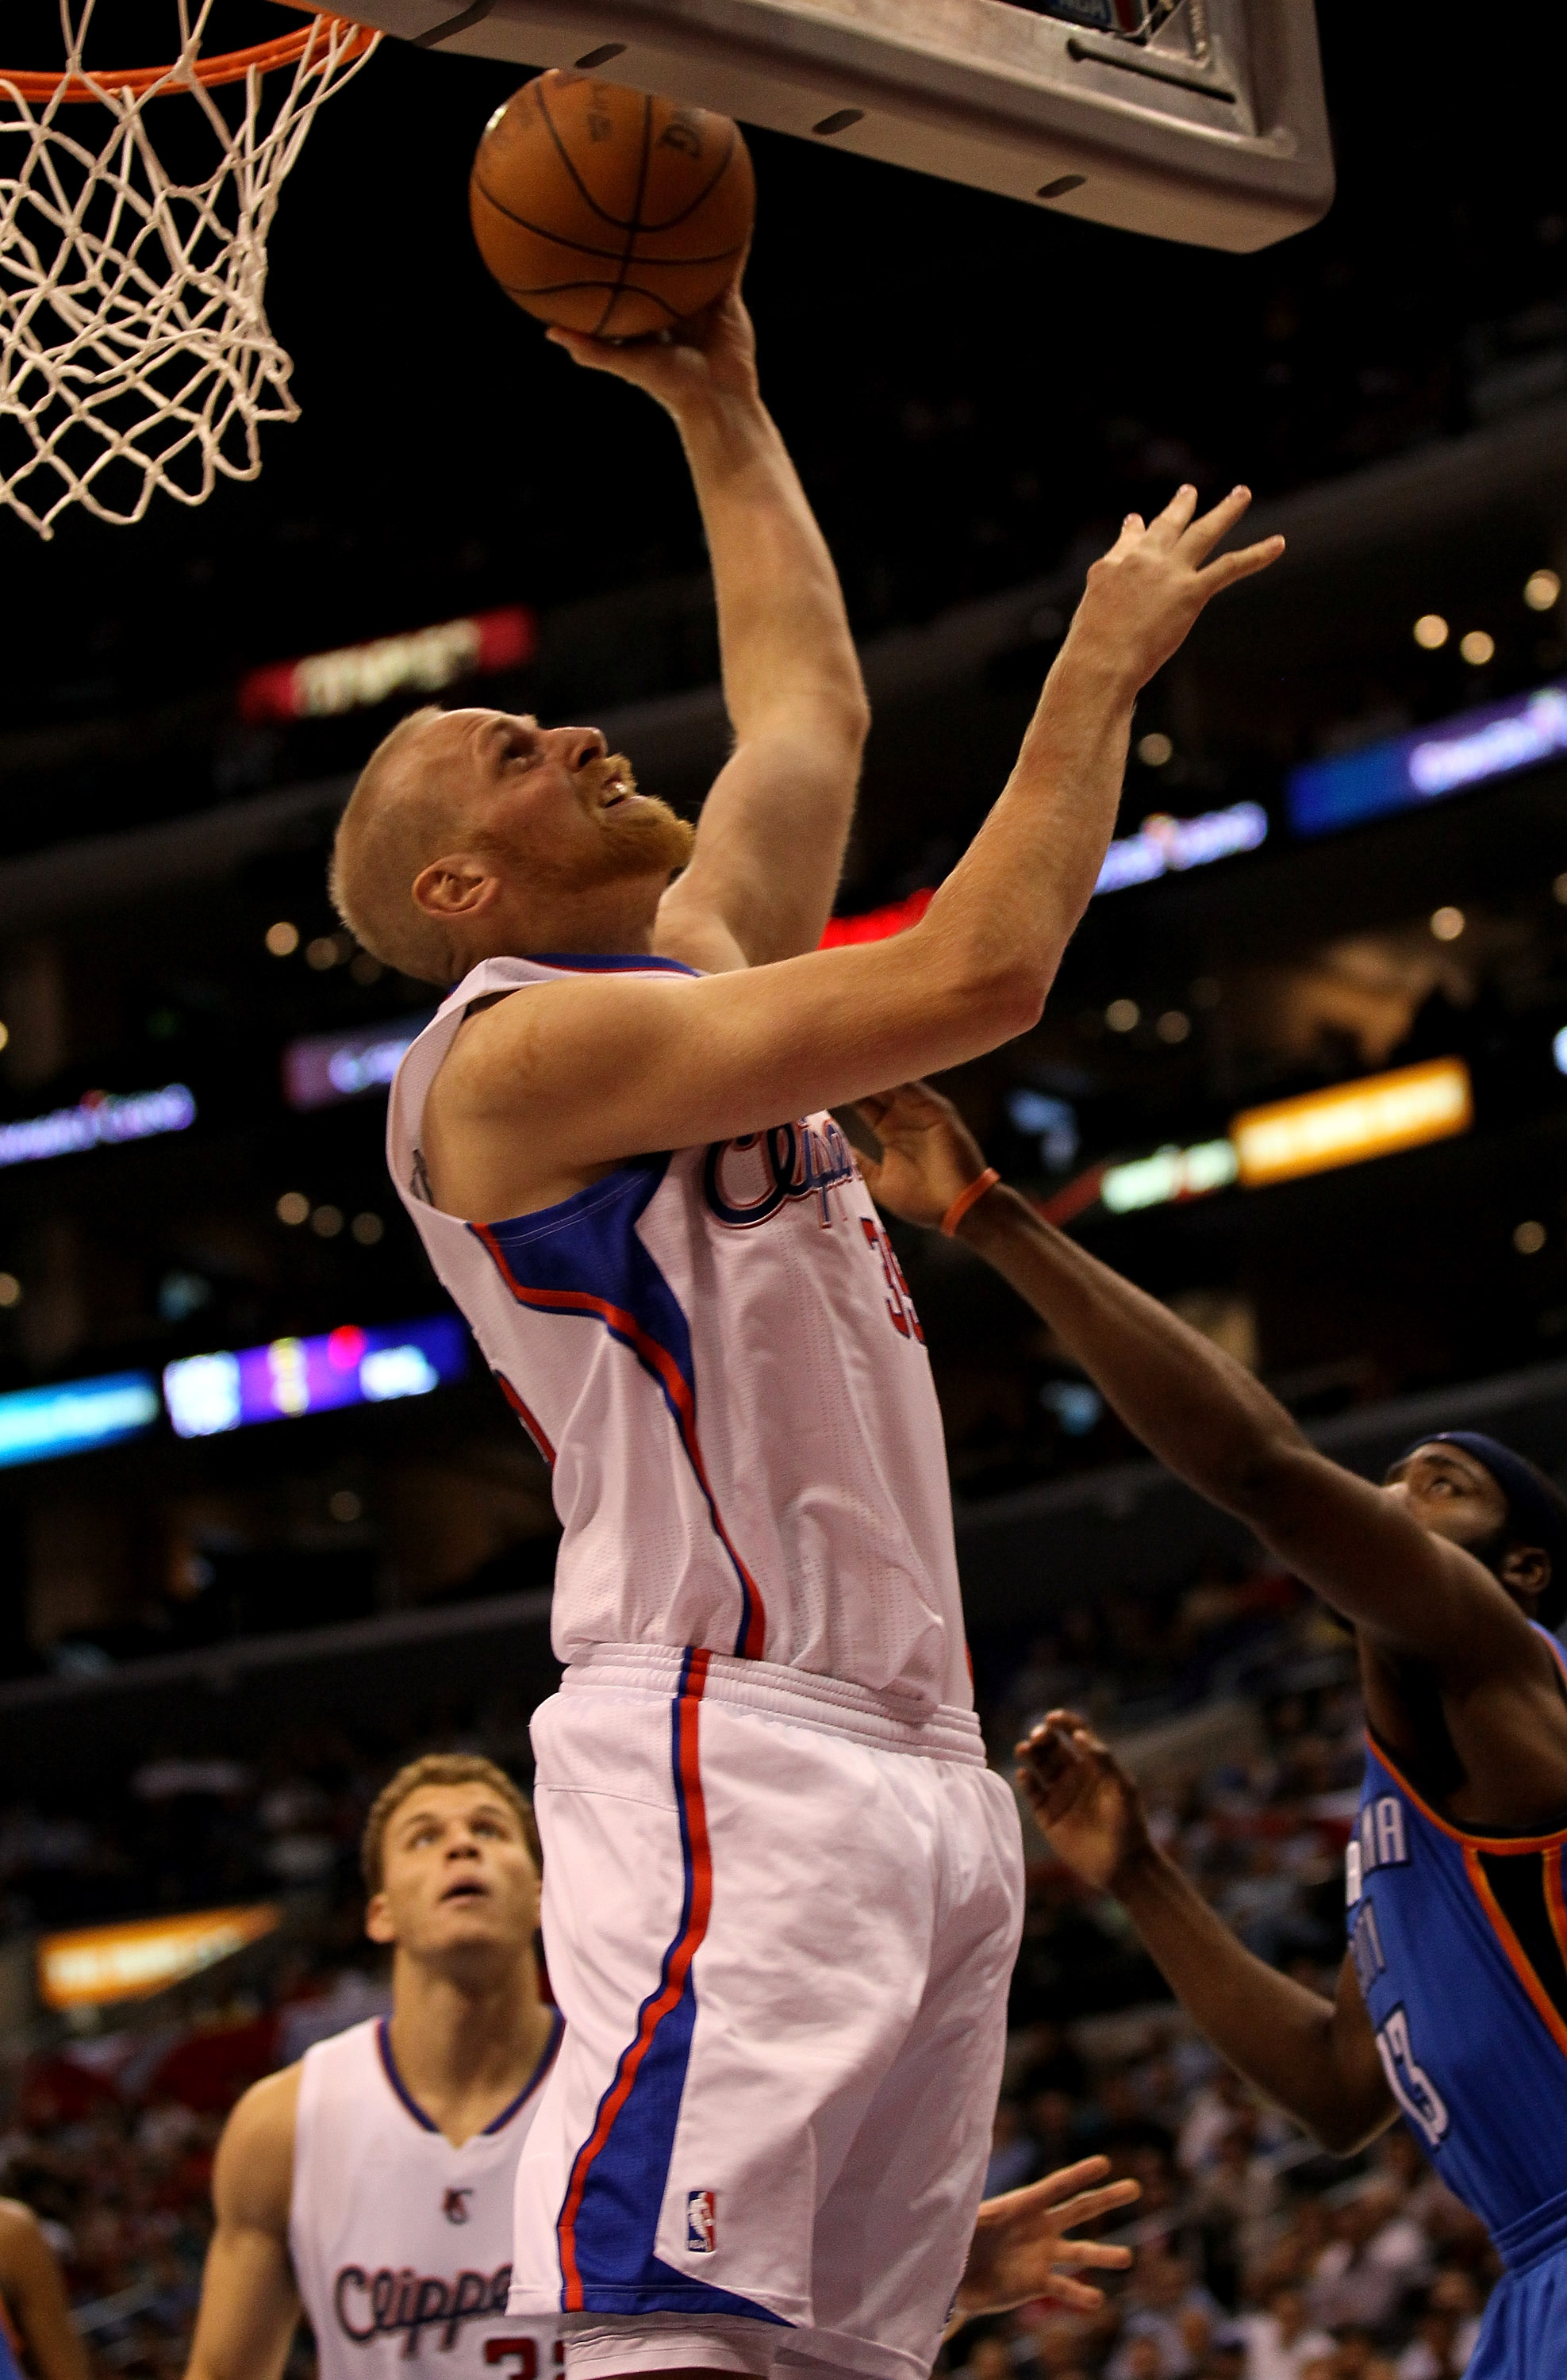 LOS ANGELES - NOVEMBER 3: Chris Kaman #35 of the Los Angeles Clippers shoots against the Oklahoma City Thunder at Staples Center on November 3, 2010 in Los Angeles, California. The Clippers won 107-92.  NOTE TO USER: User expressly acknowledges and agrees